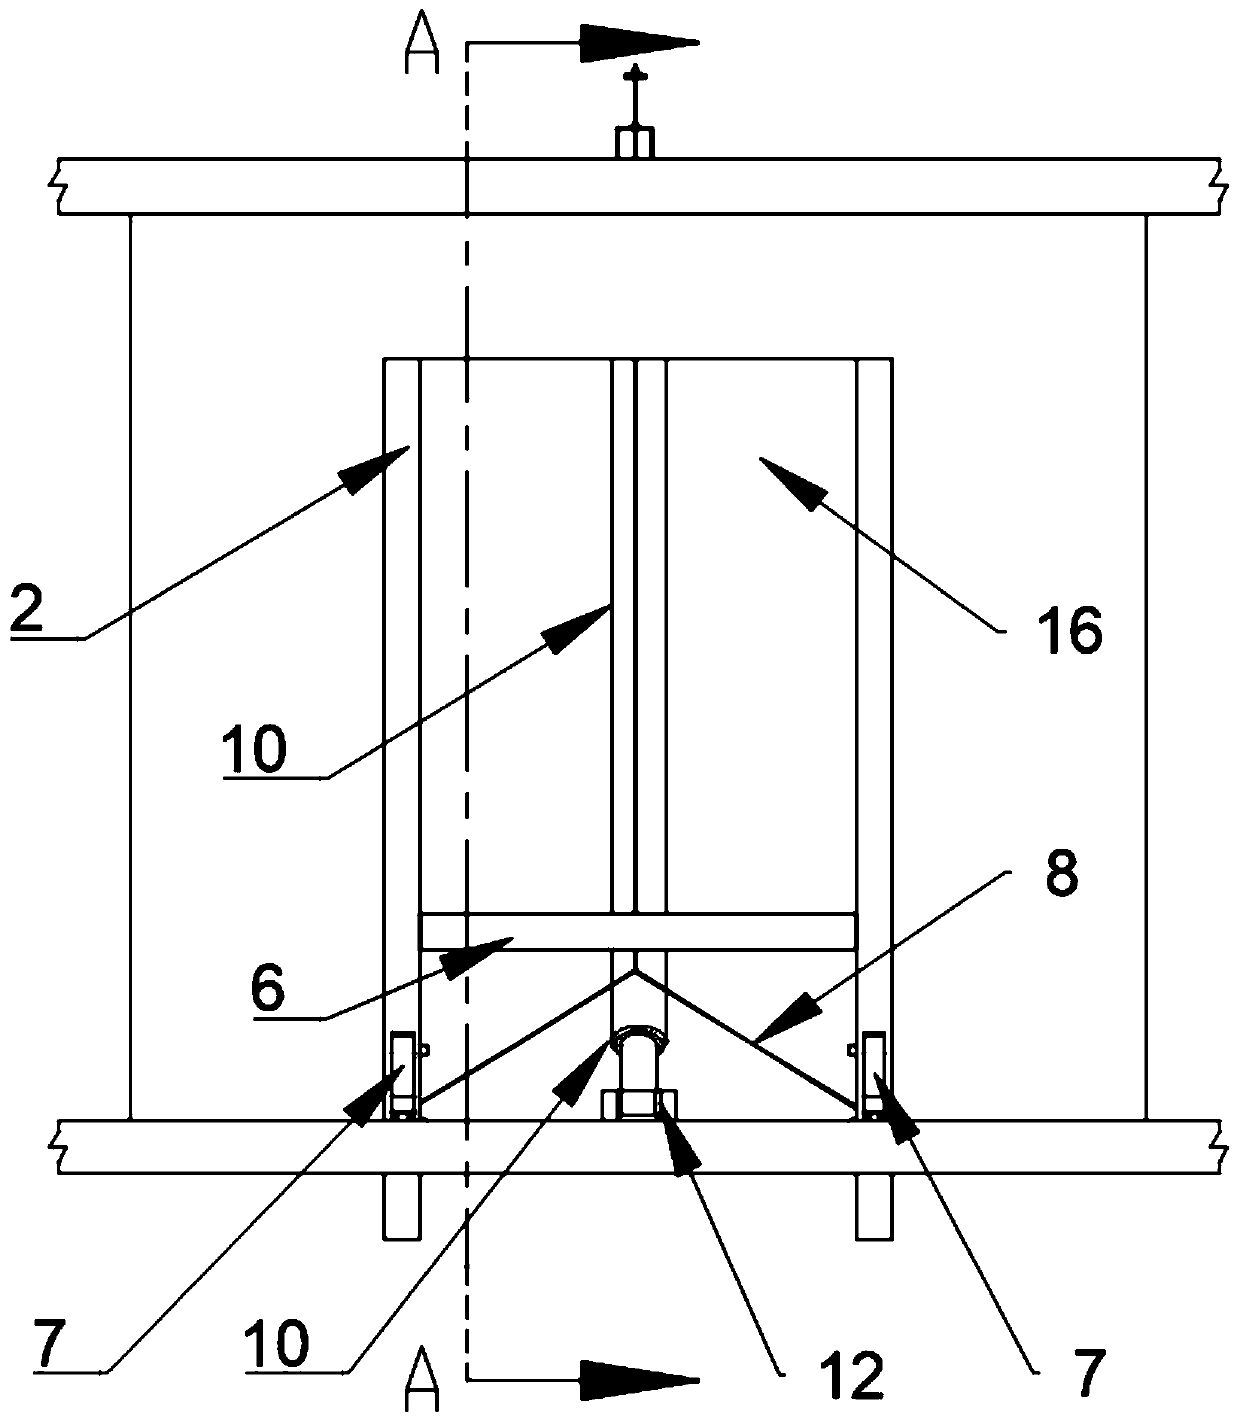 Construction method applied to lifting platform in elevator shaft in constructional engineering